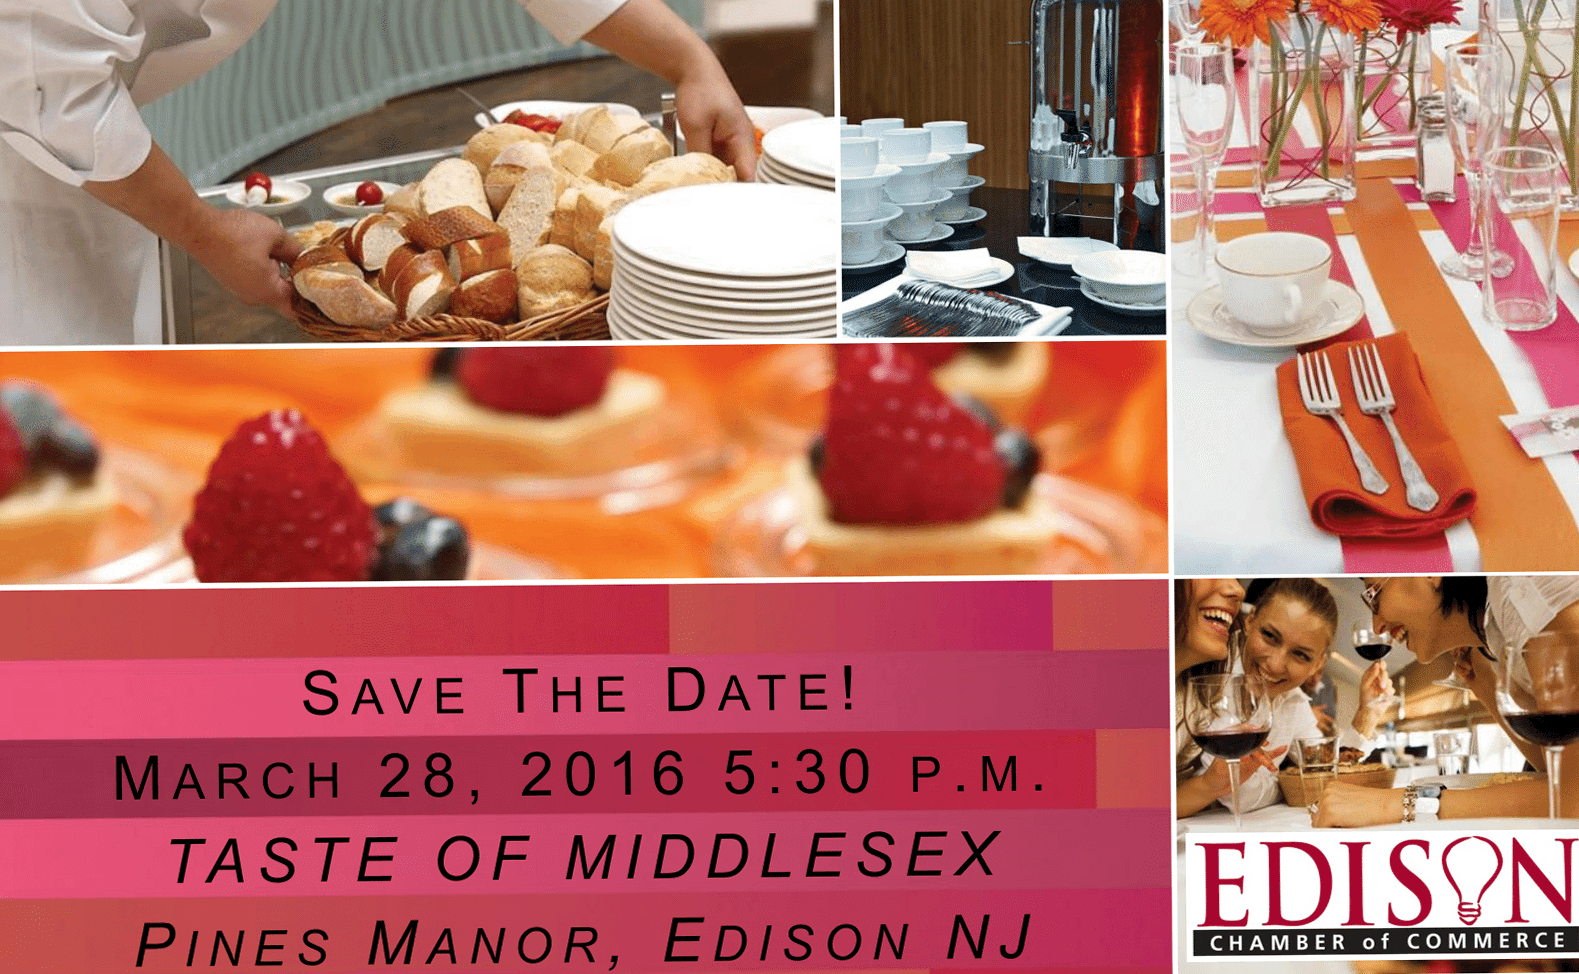 Market your business at the Taste of Middlesex!